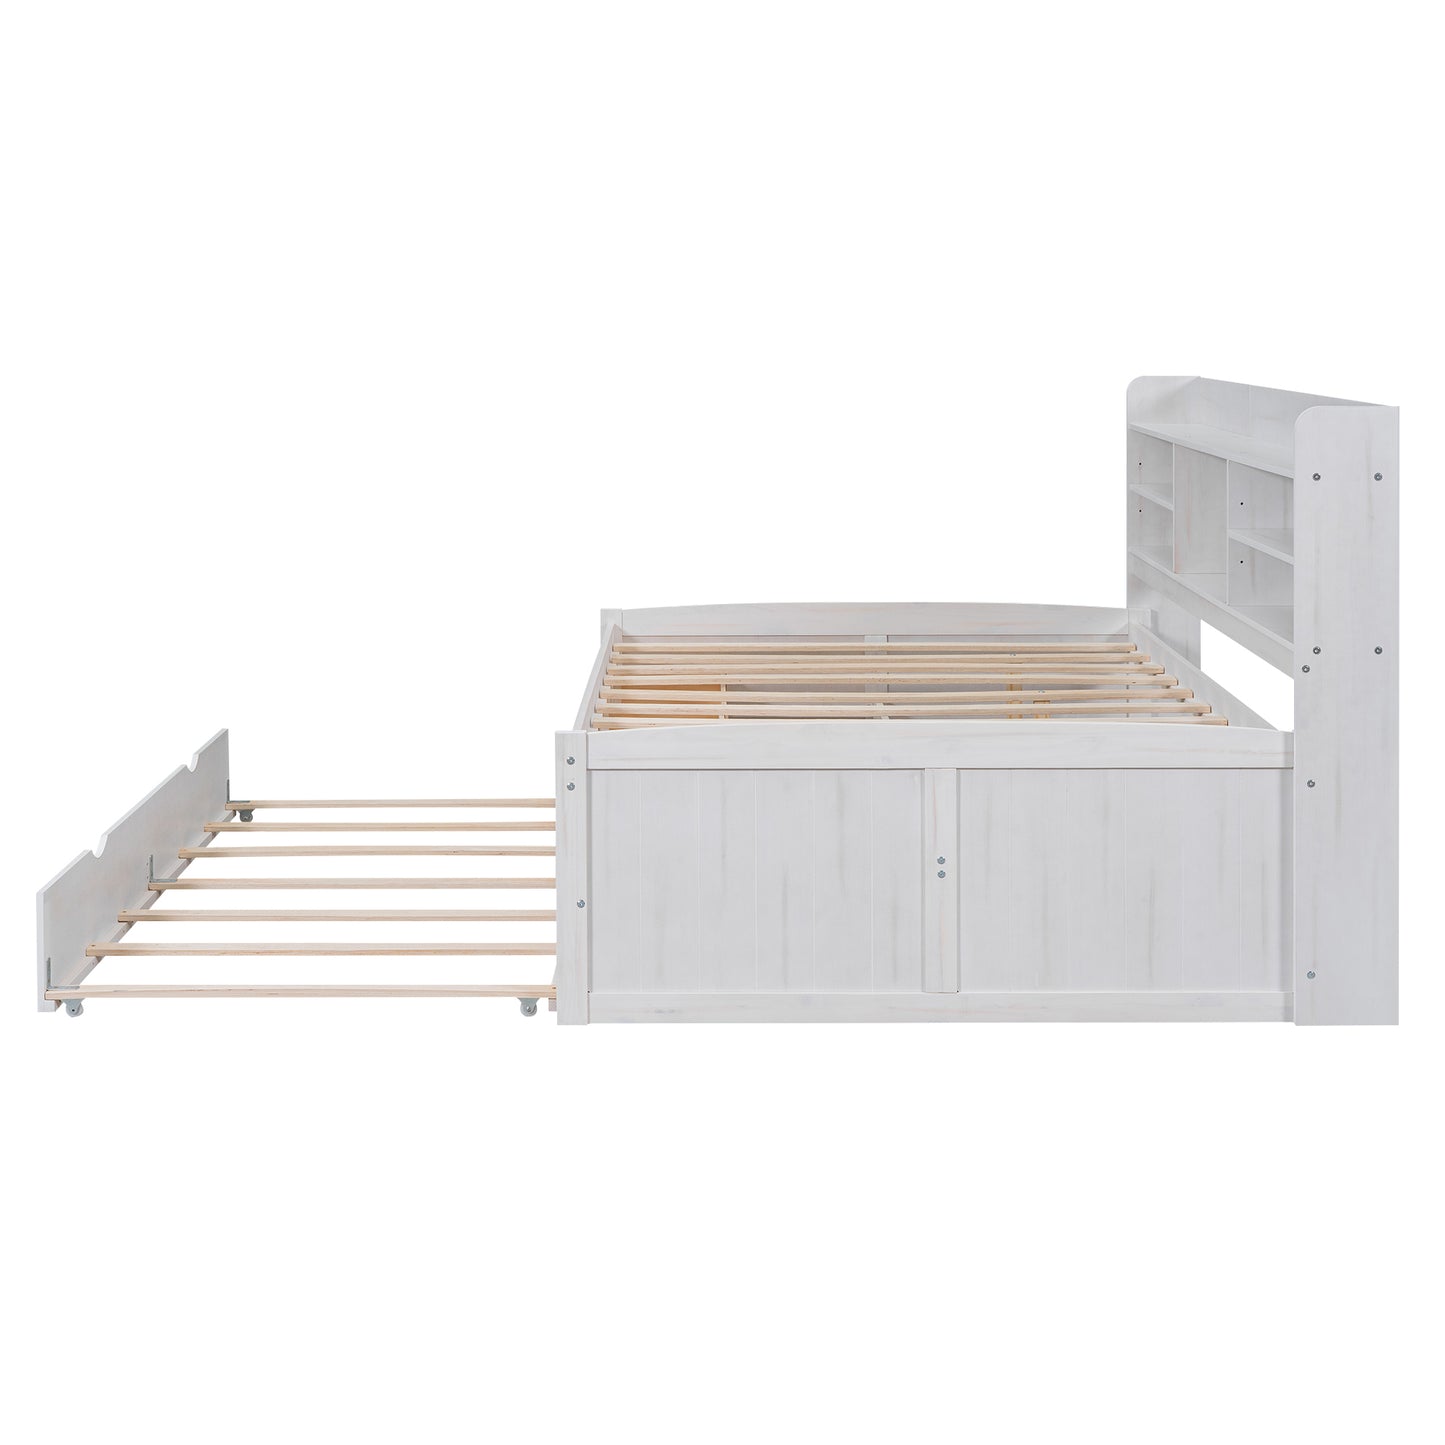 Full Size Wooden Captain Platform Bed with Built-in Bookshelves,Three Storage Drawers and Trundle,White